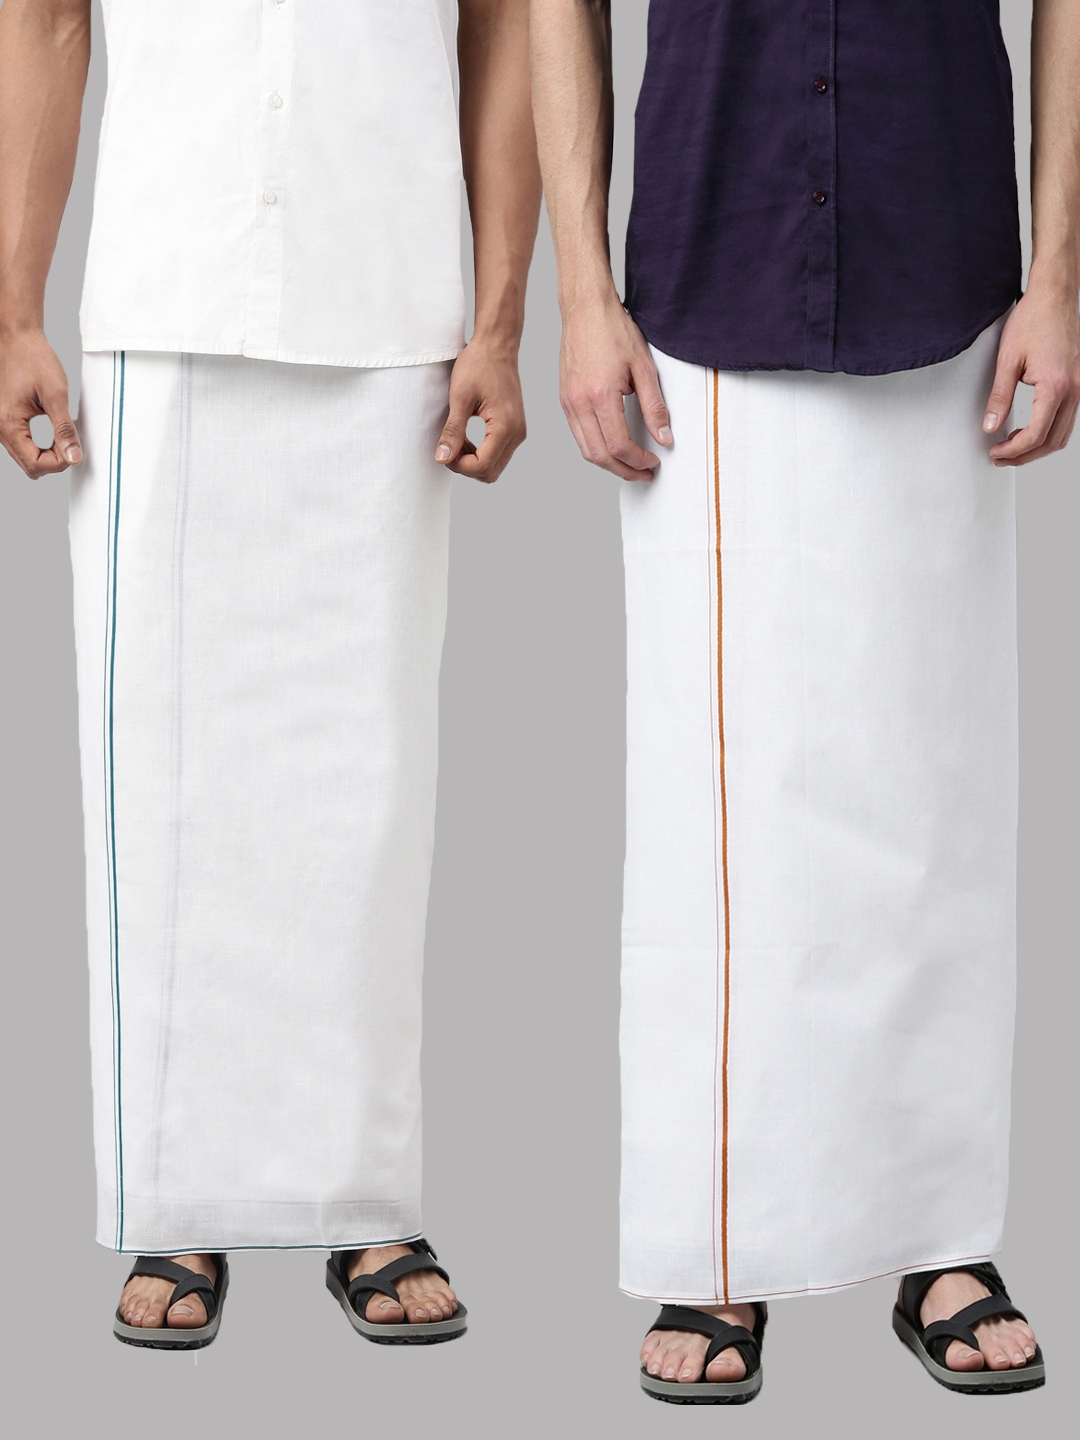 WHITE HEART | White Heart Mens 100% Cotton White Double and Small Border Dhoti - Pack of 2 0